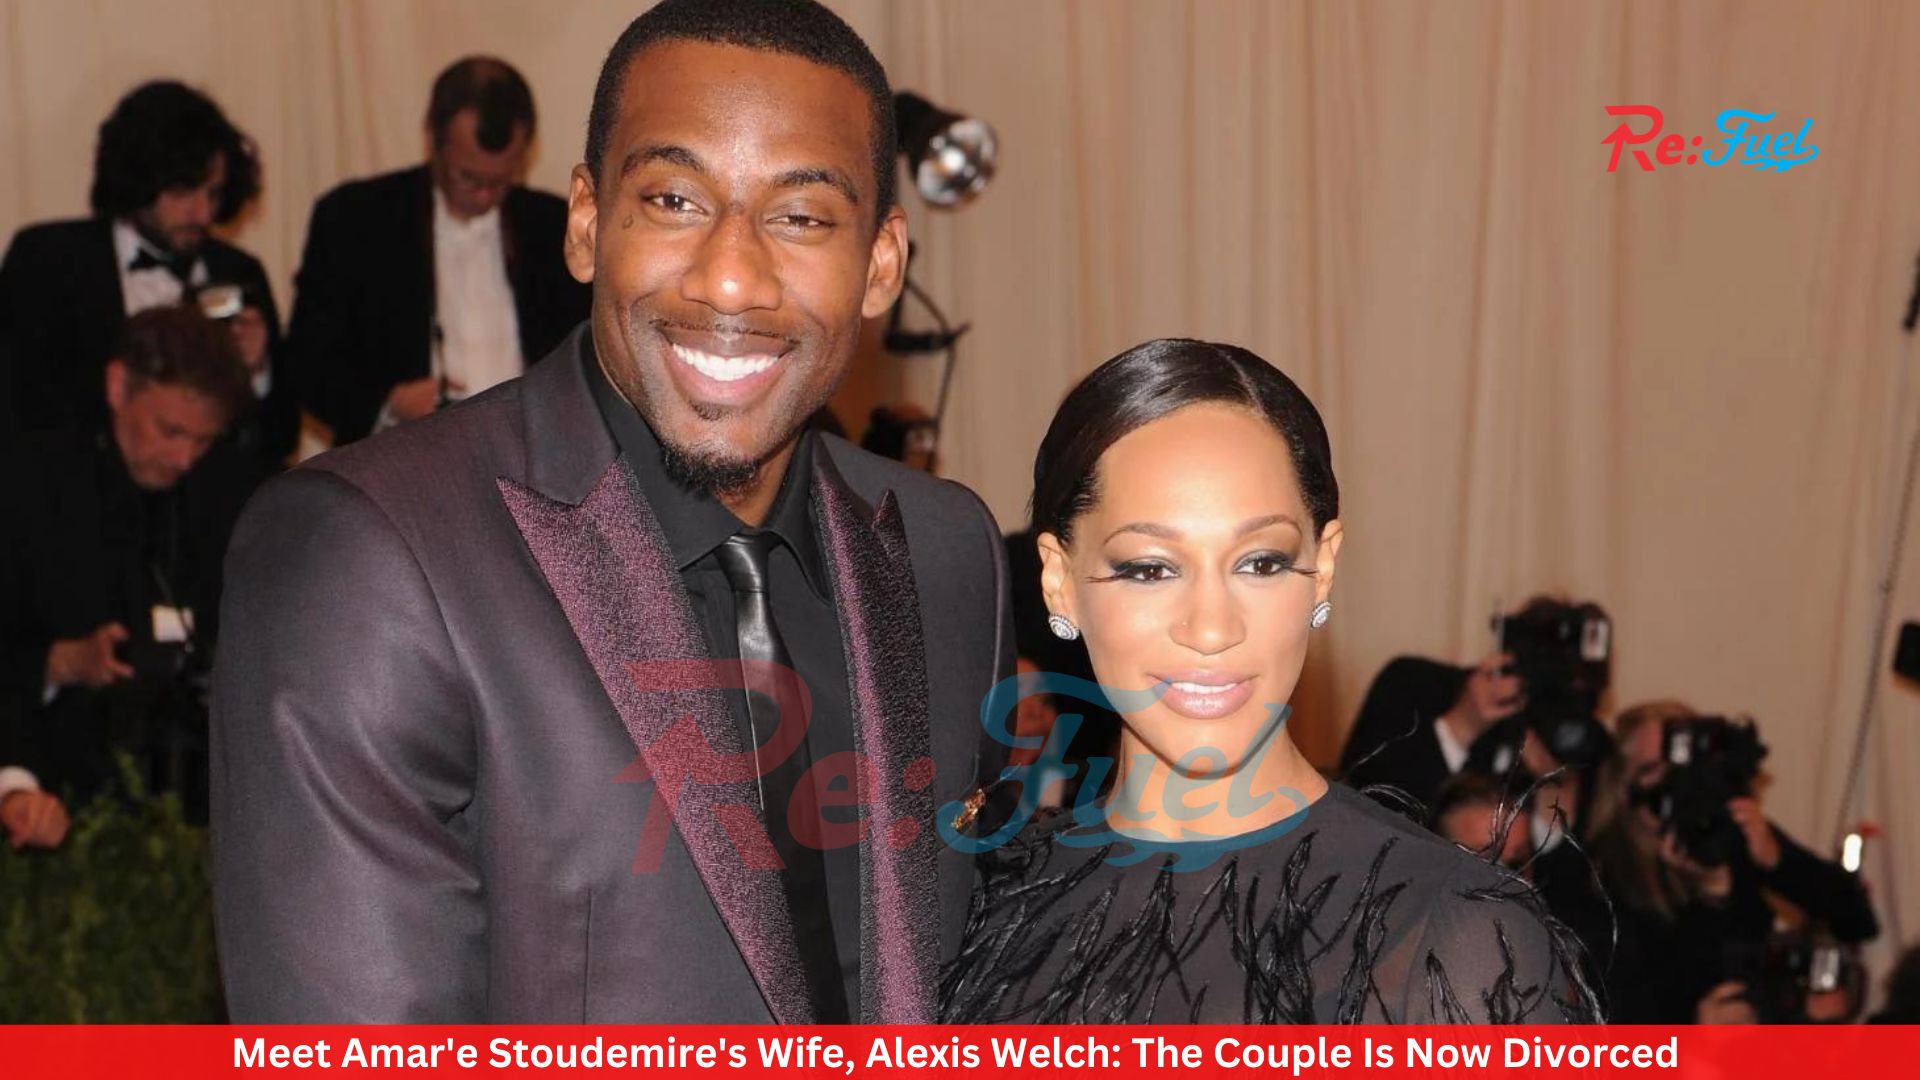 Meet Amar'e Stoudemire's Wife, Alexis Welch: The Couple Is Now Divorced